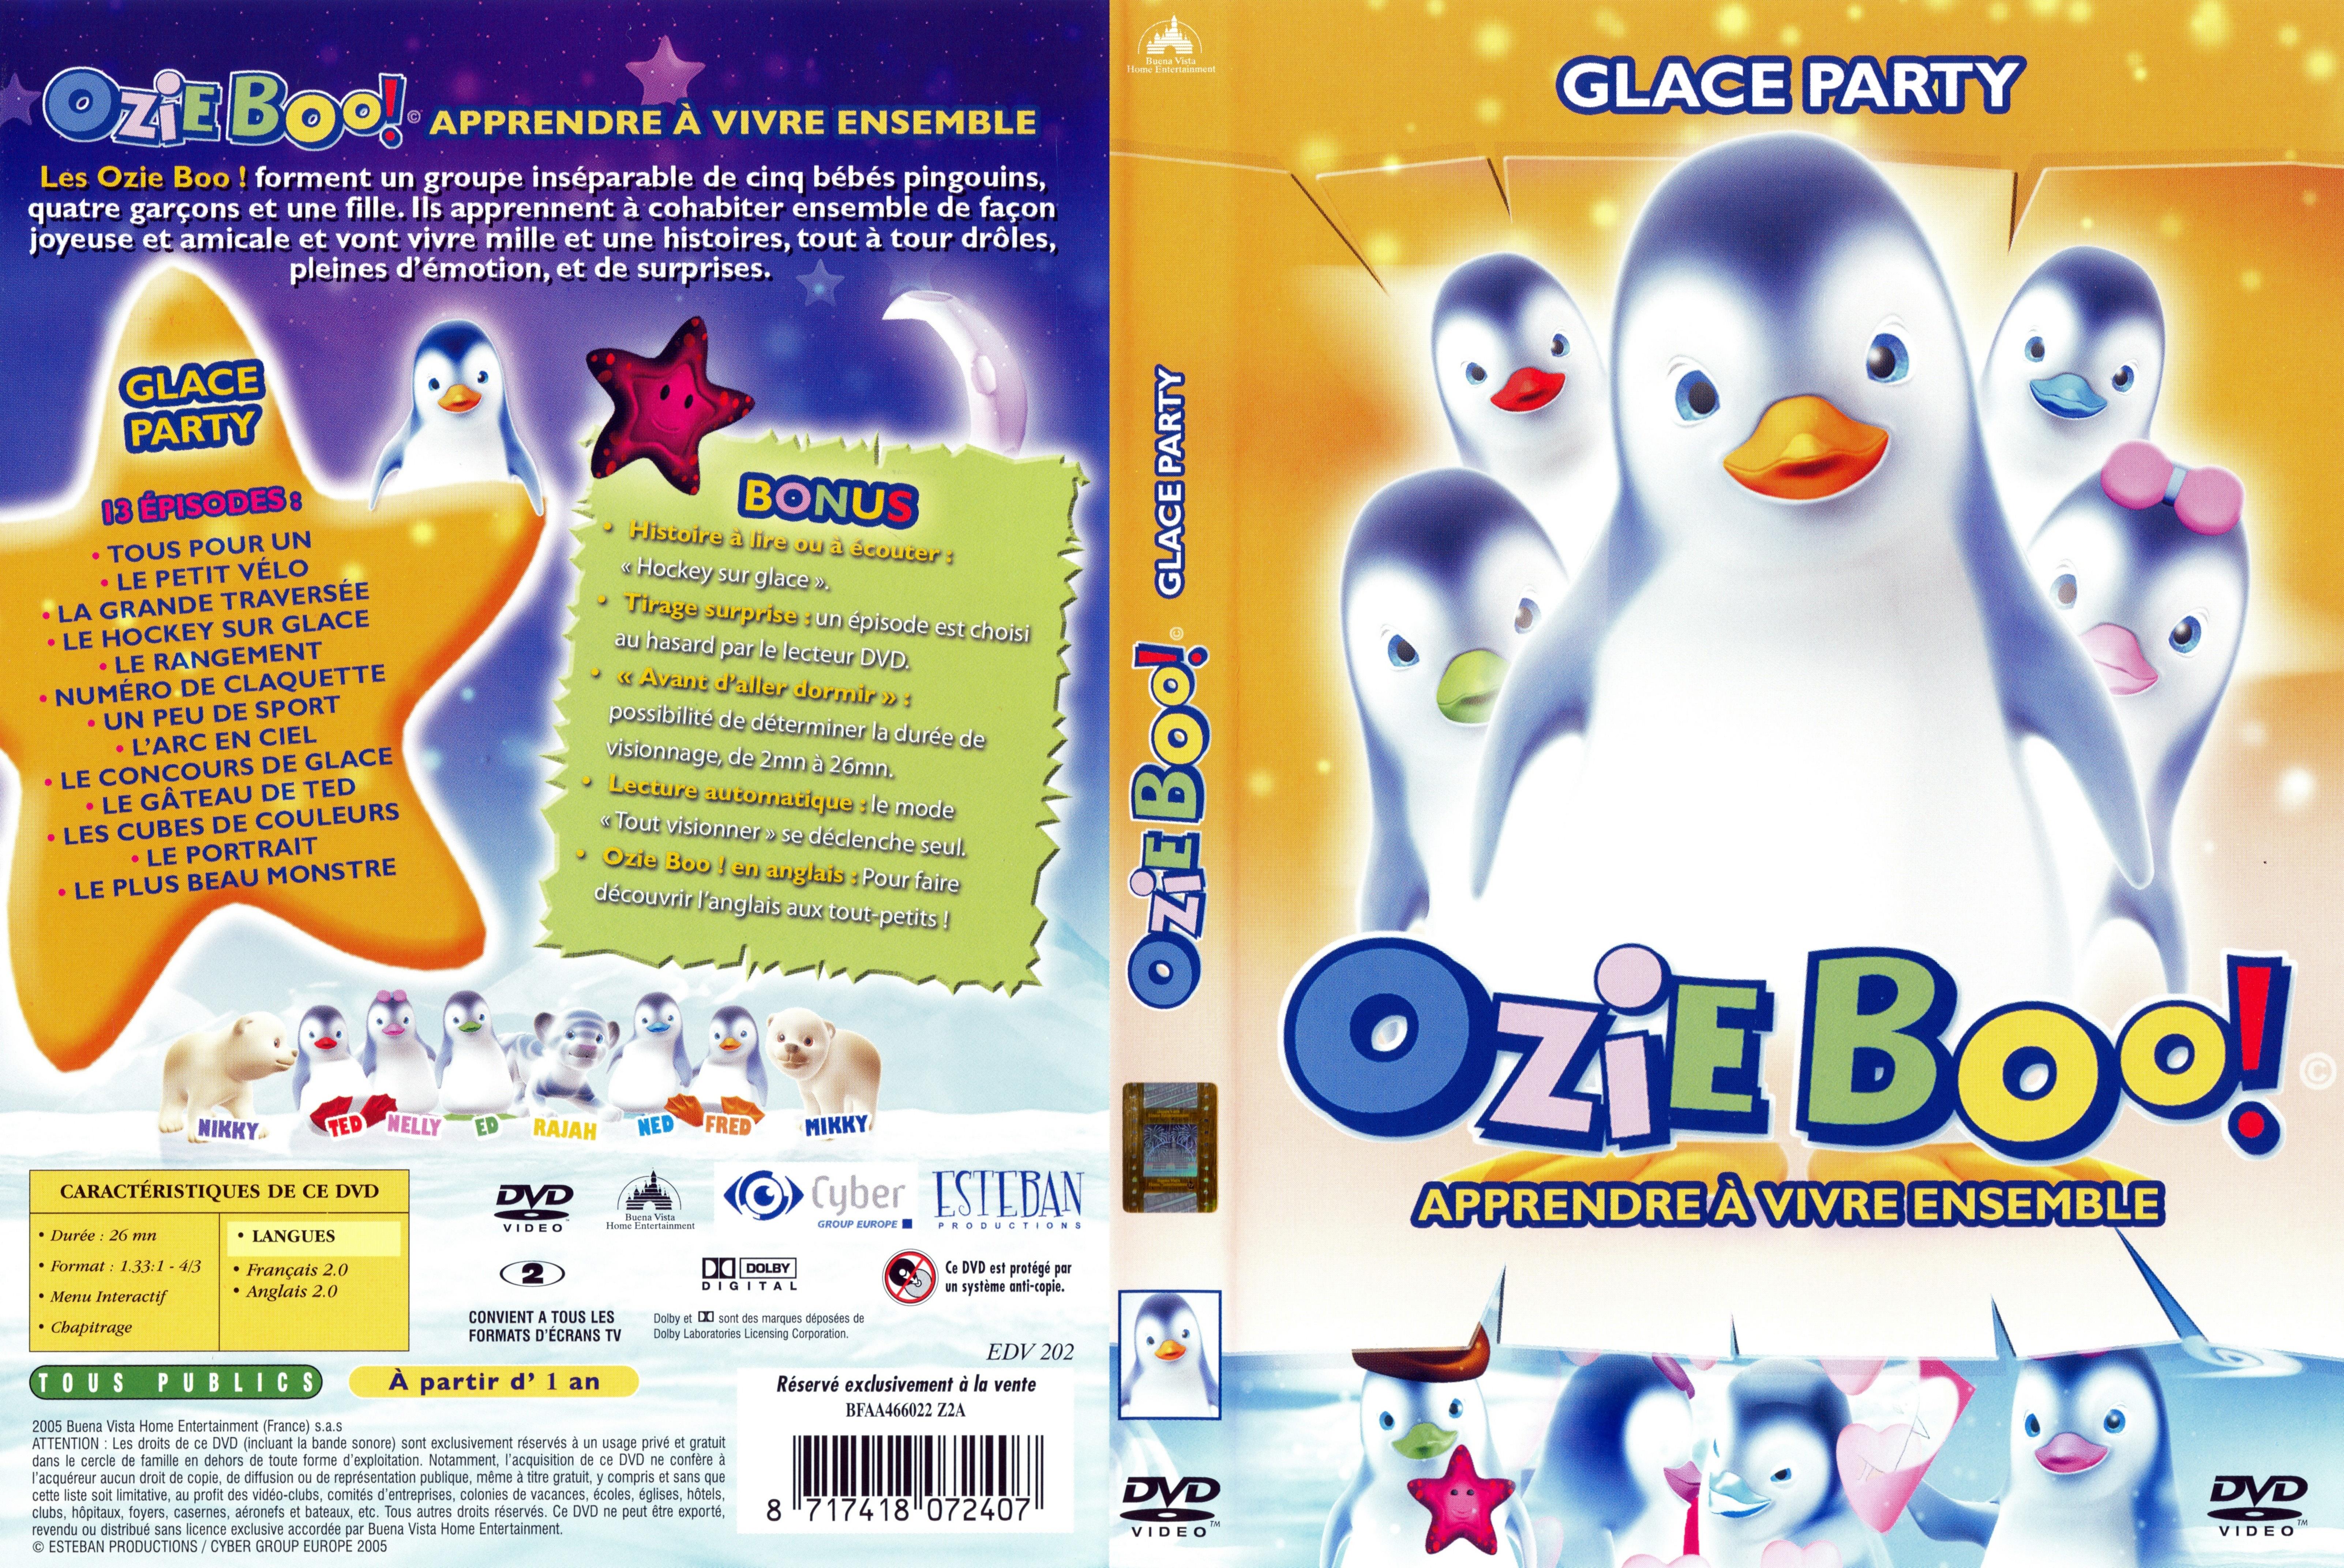 Jaquette DVD Ozie boo glace party